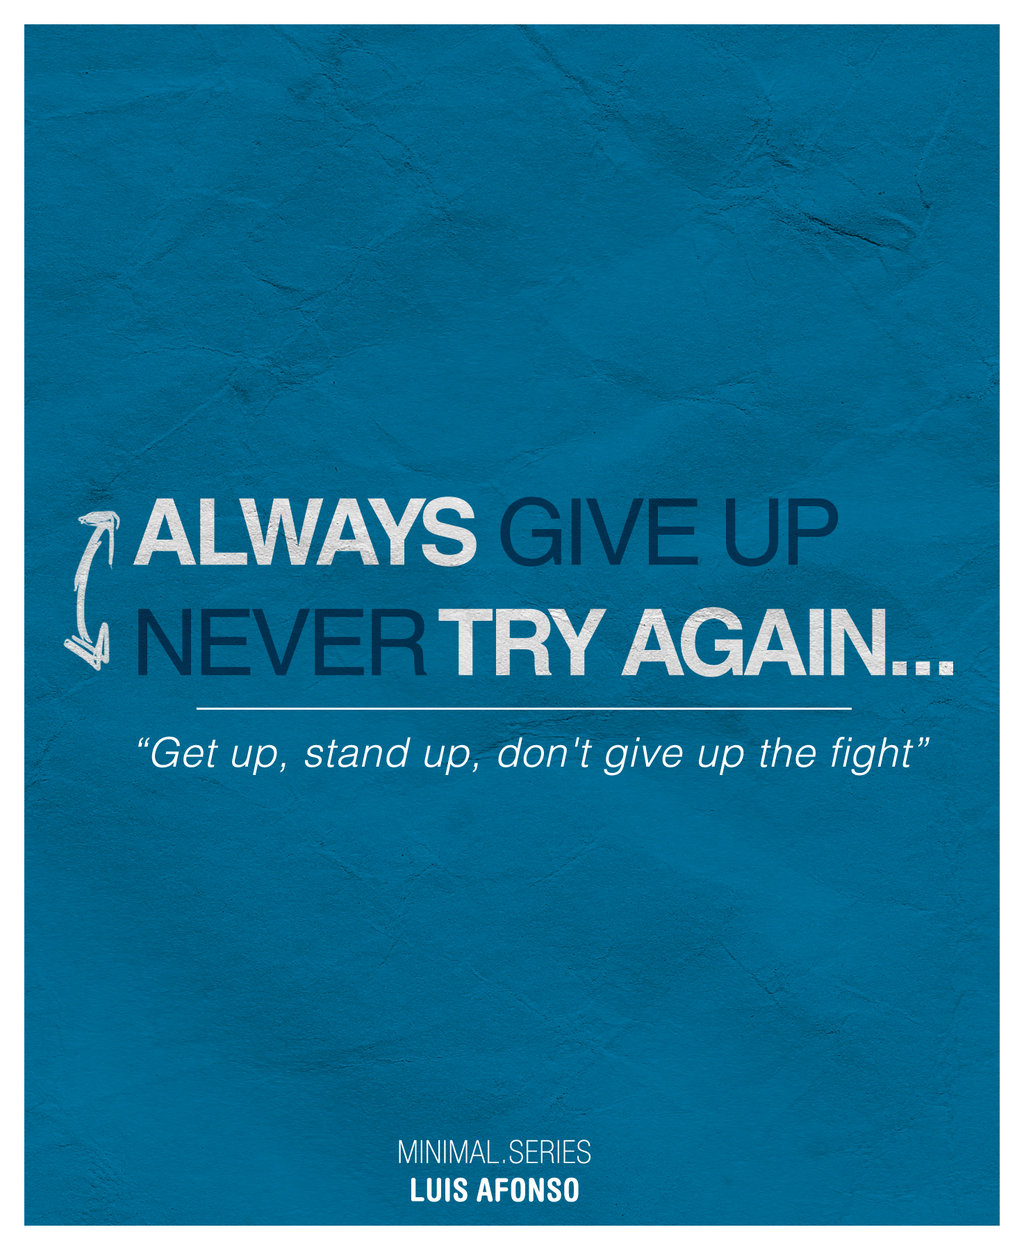 Never Give Up Wallpaper Mlm Motivational Download Mlm - Never Give Up - HD Wallpaper 